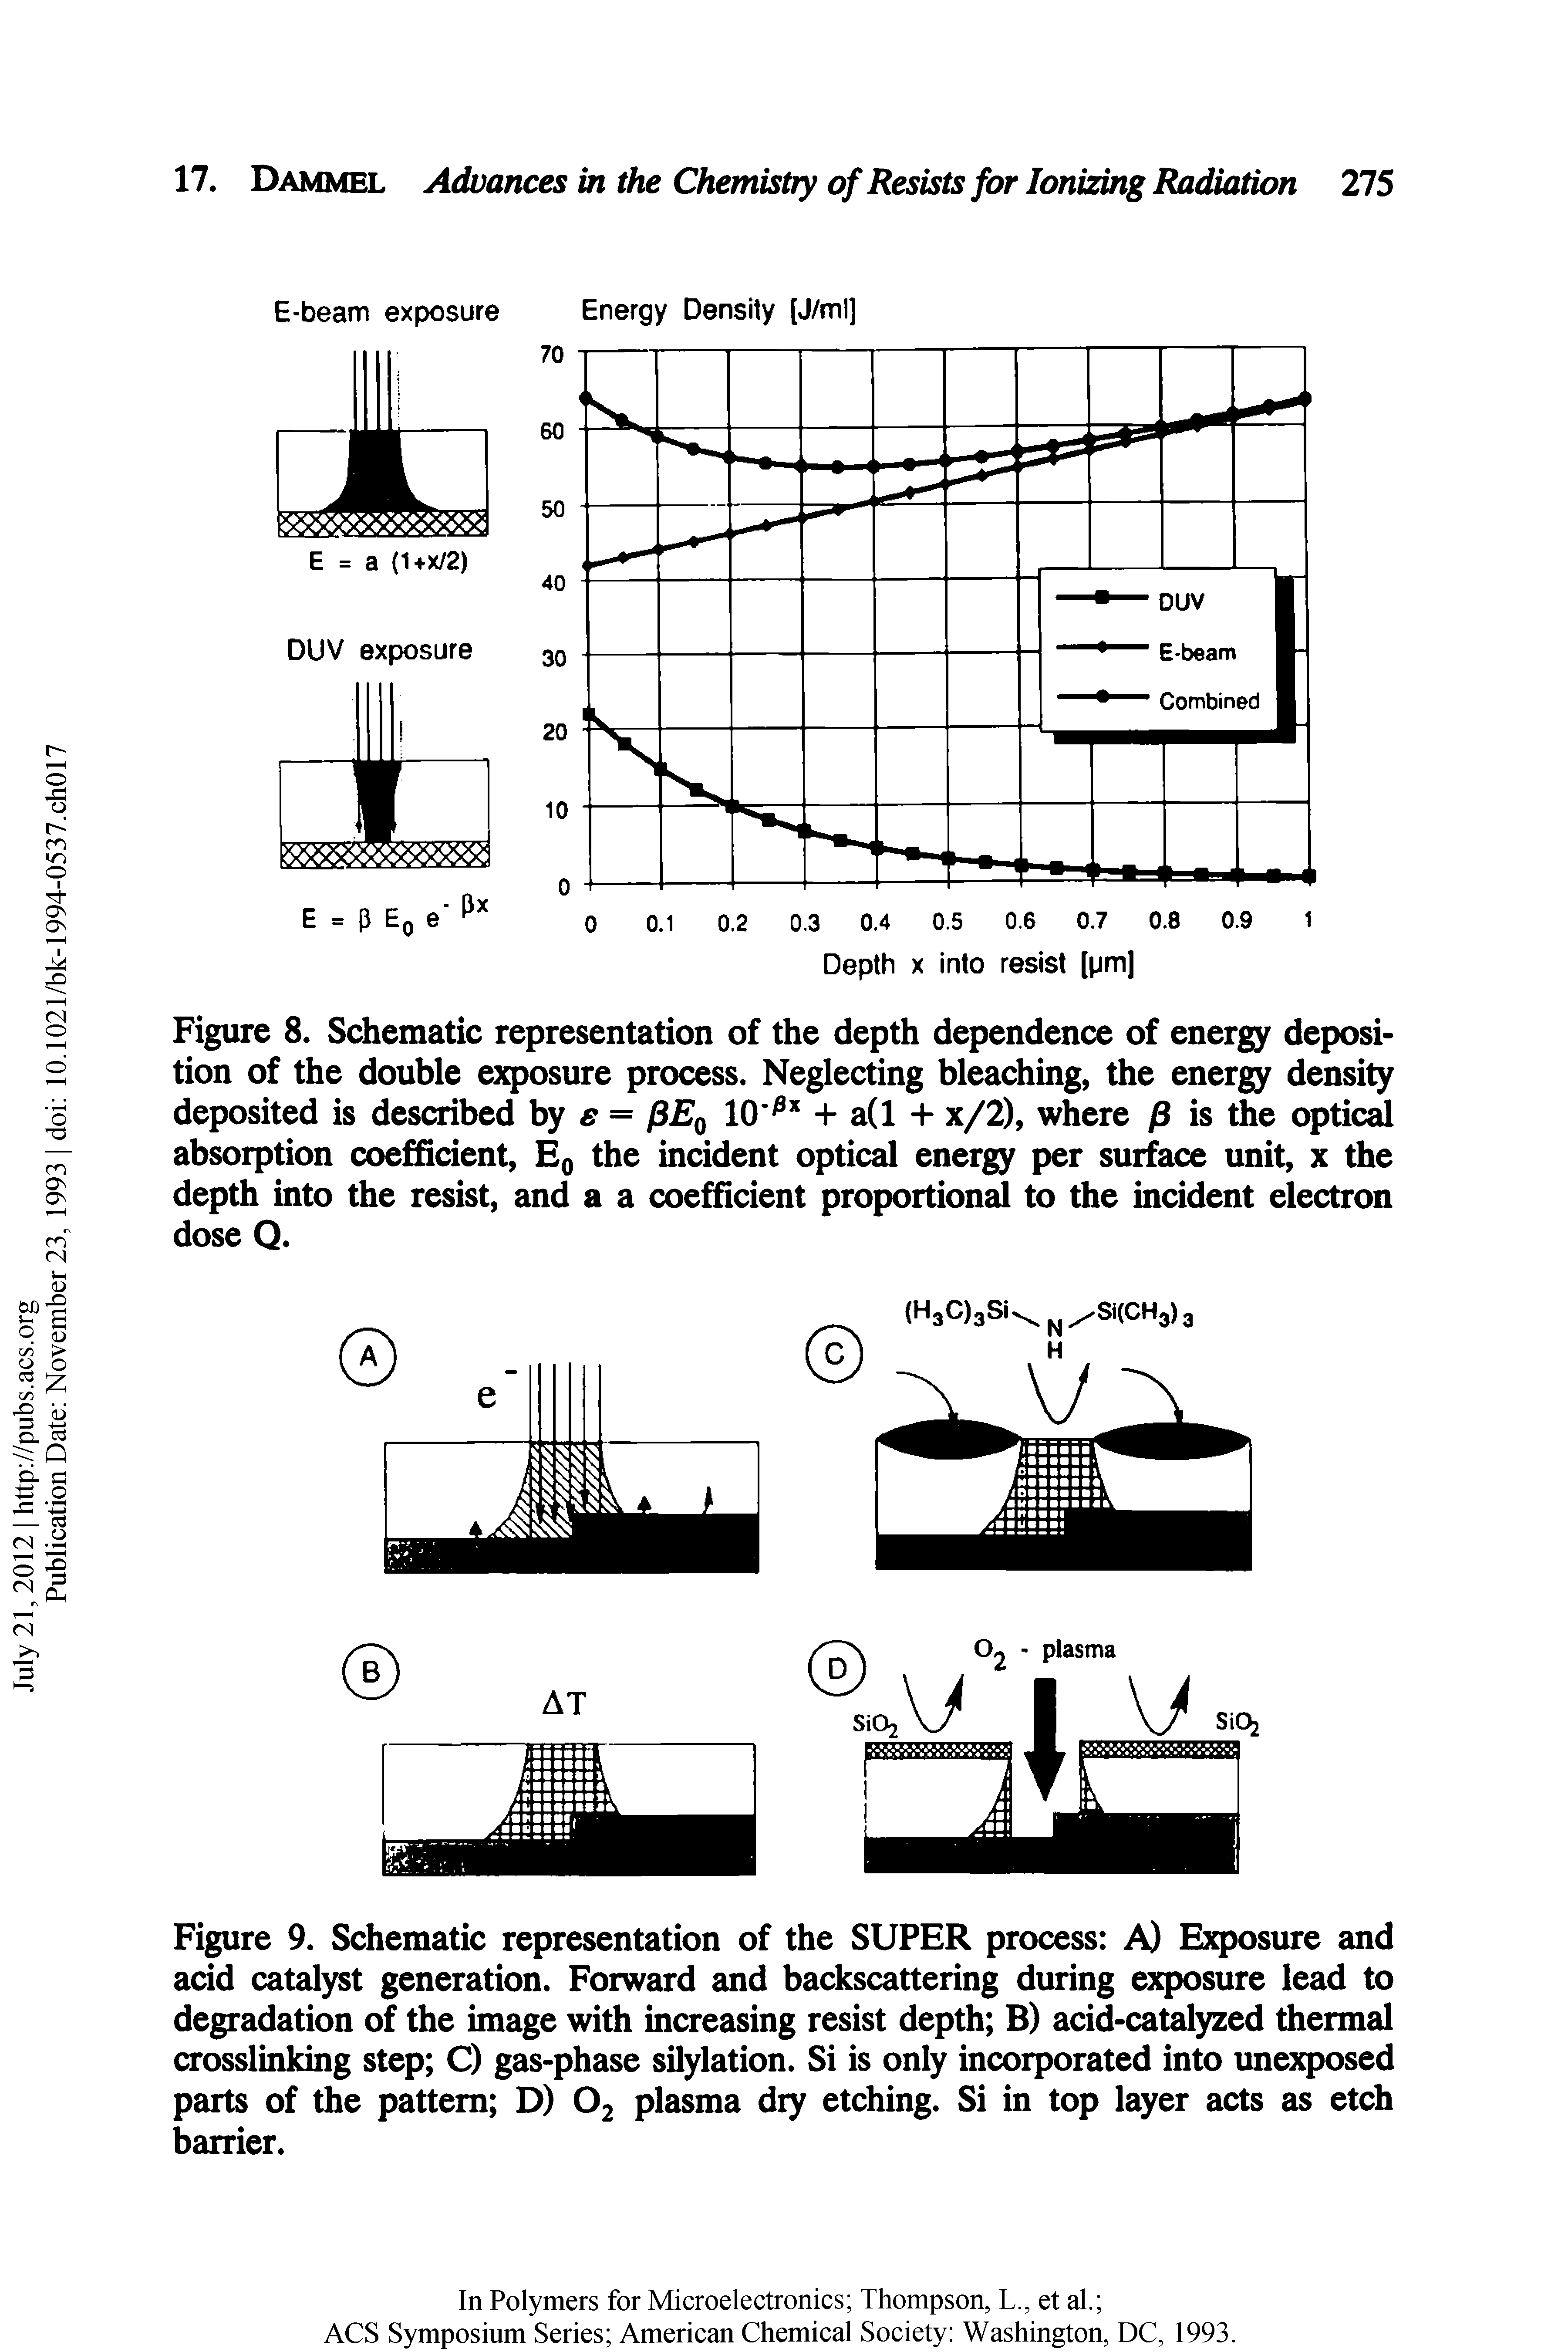 Figure 9. Schematic representation of the SUPER process A) Exposure and acid catalyst generation. Forward and backscattering during exposure lead to degradation of the image with increasing resist depth B) acid-catalyzed thermal crosslinking step C) gas-phase silylation. Si is only incorporated into unexposed parts of the pattern D) Oj plasma dry etching. Si in top layer acts as etch barrier.